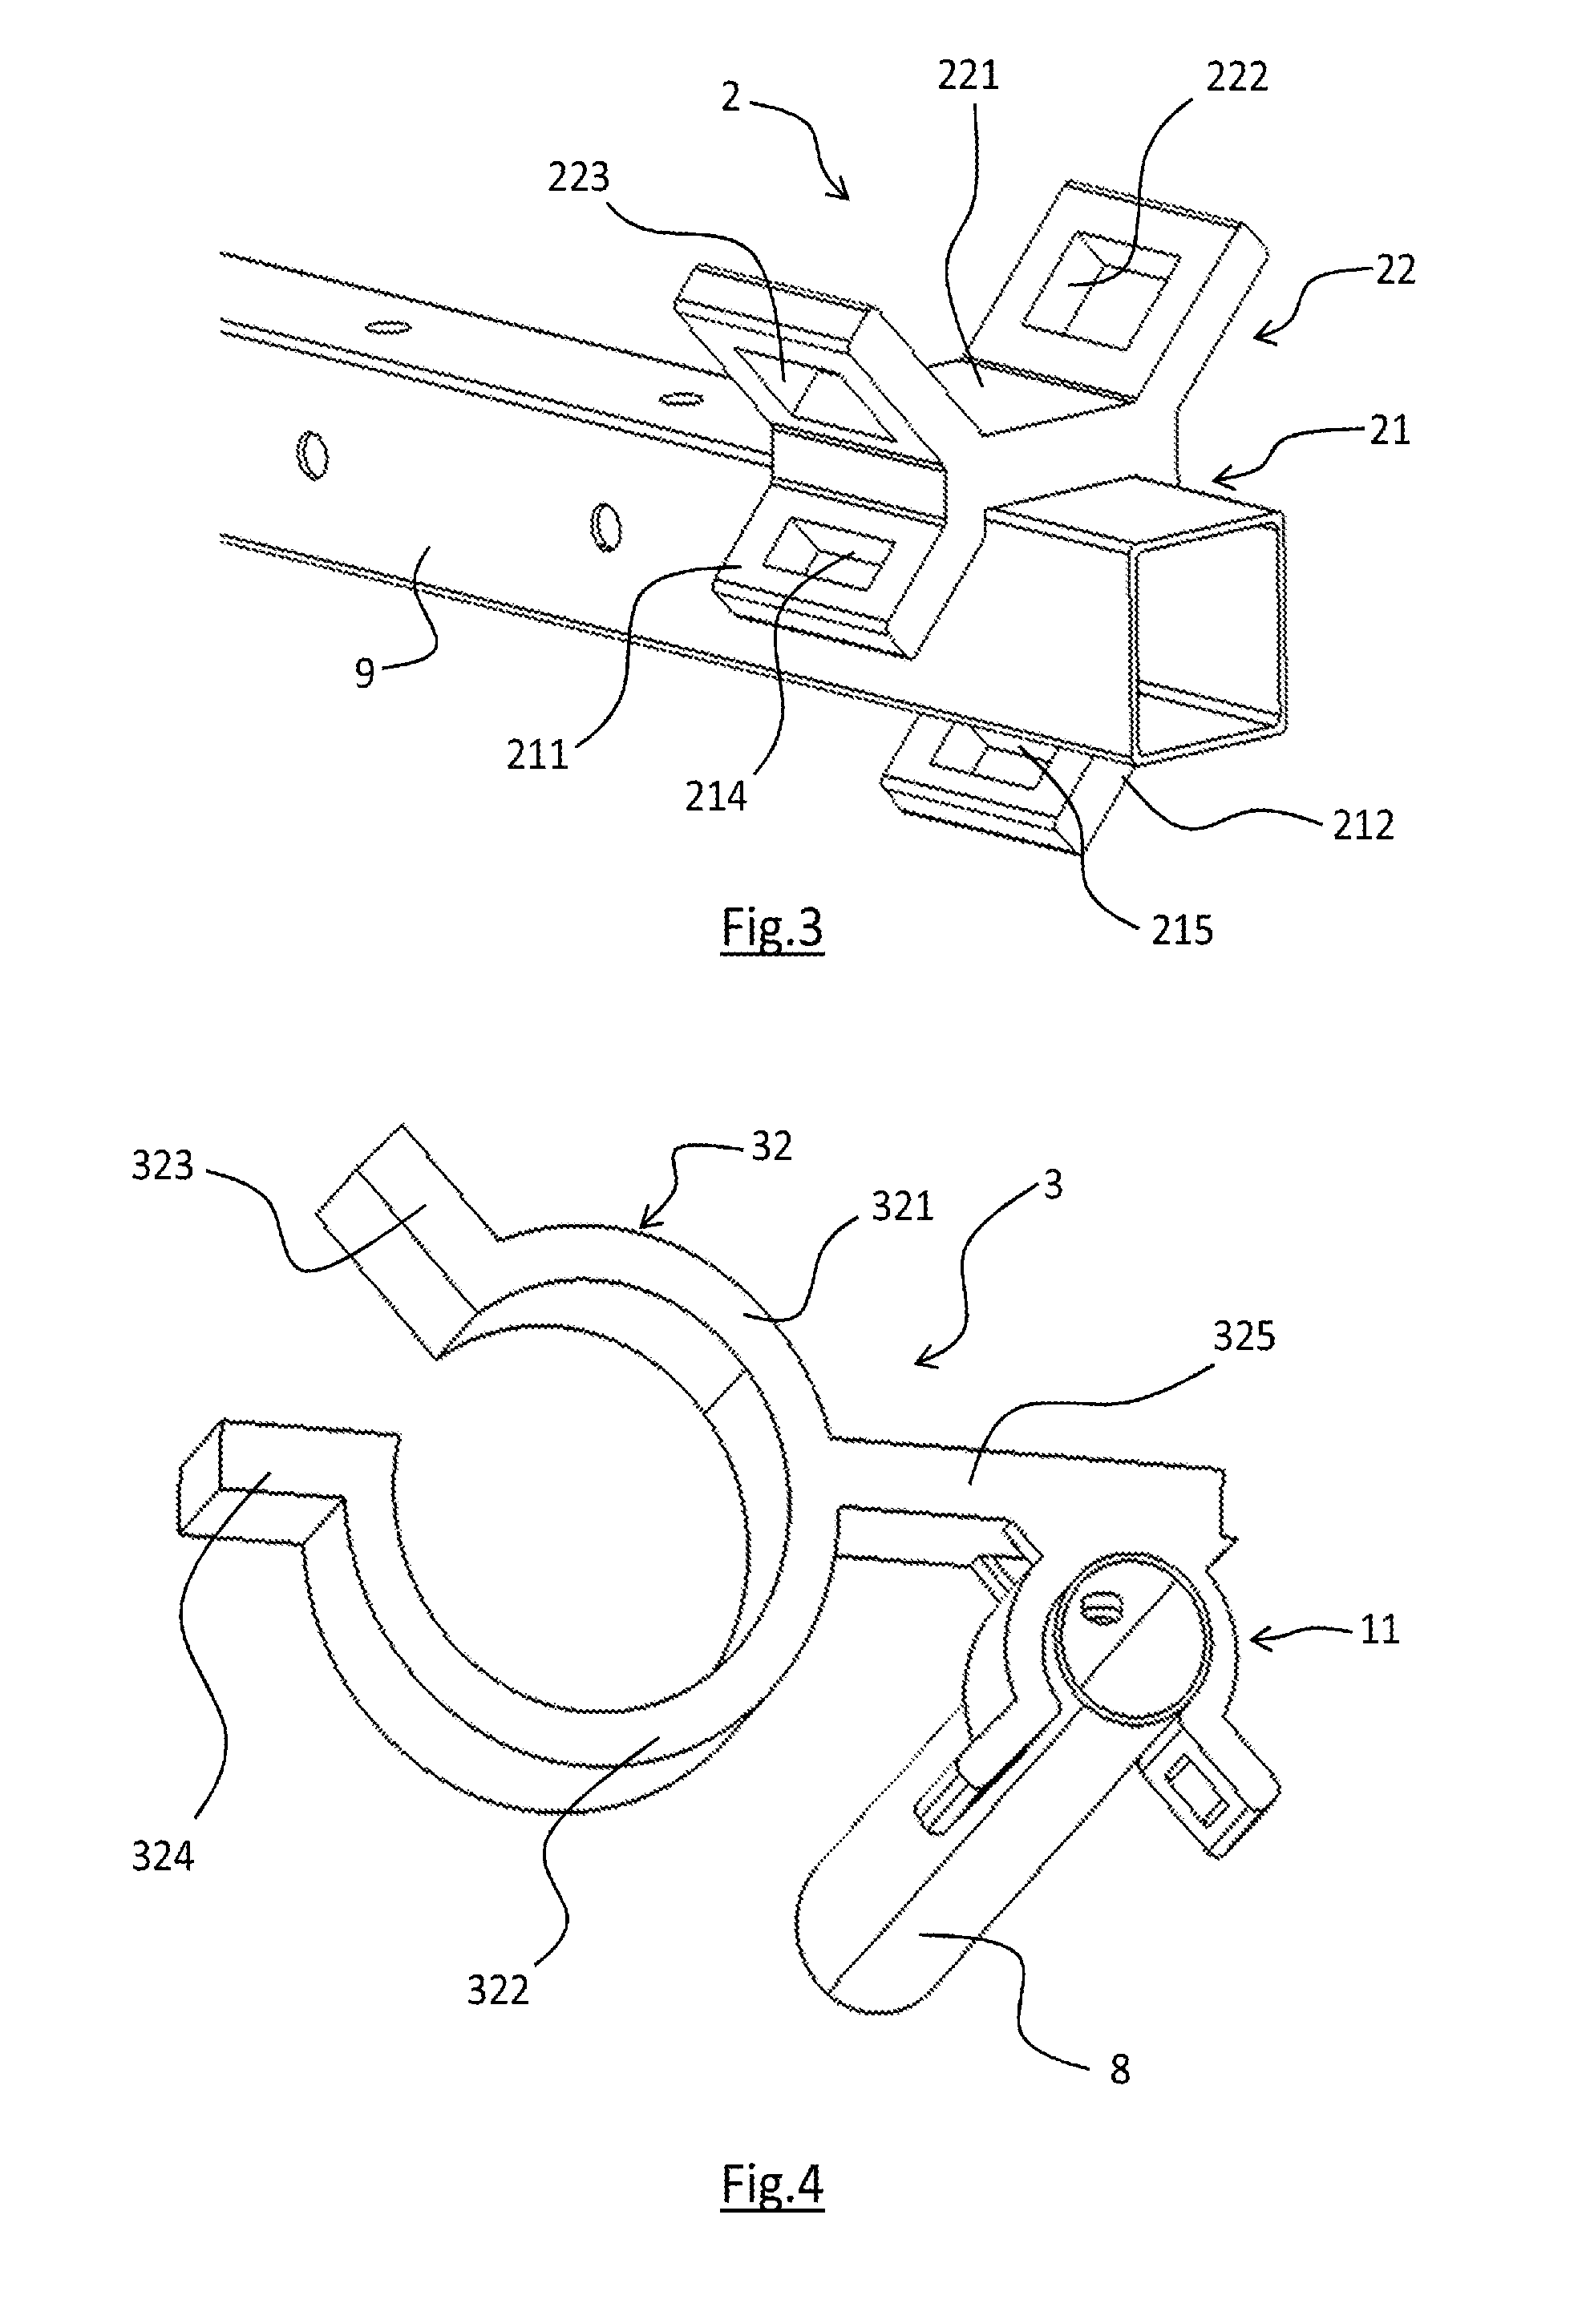 Support element for supporting at least one conduit in an aircraft, and corresponding support device